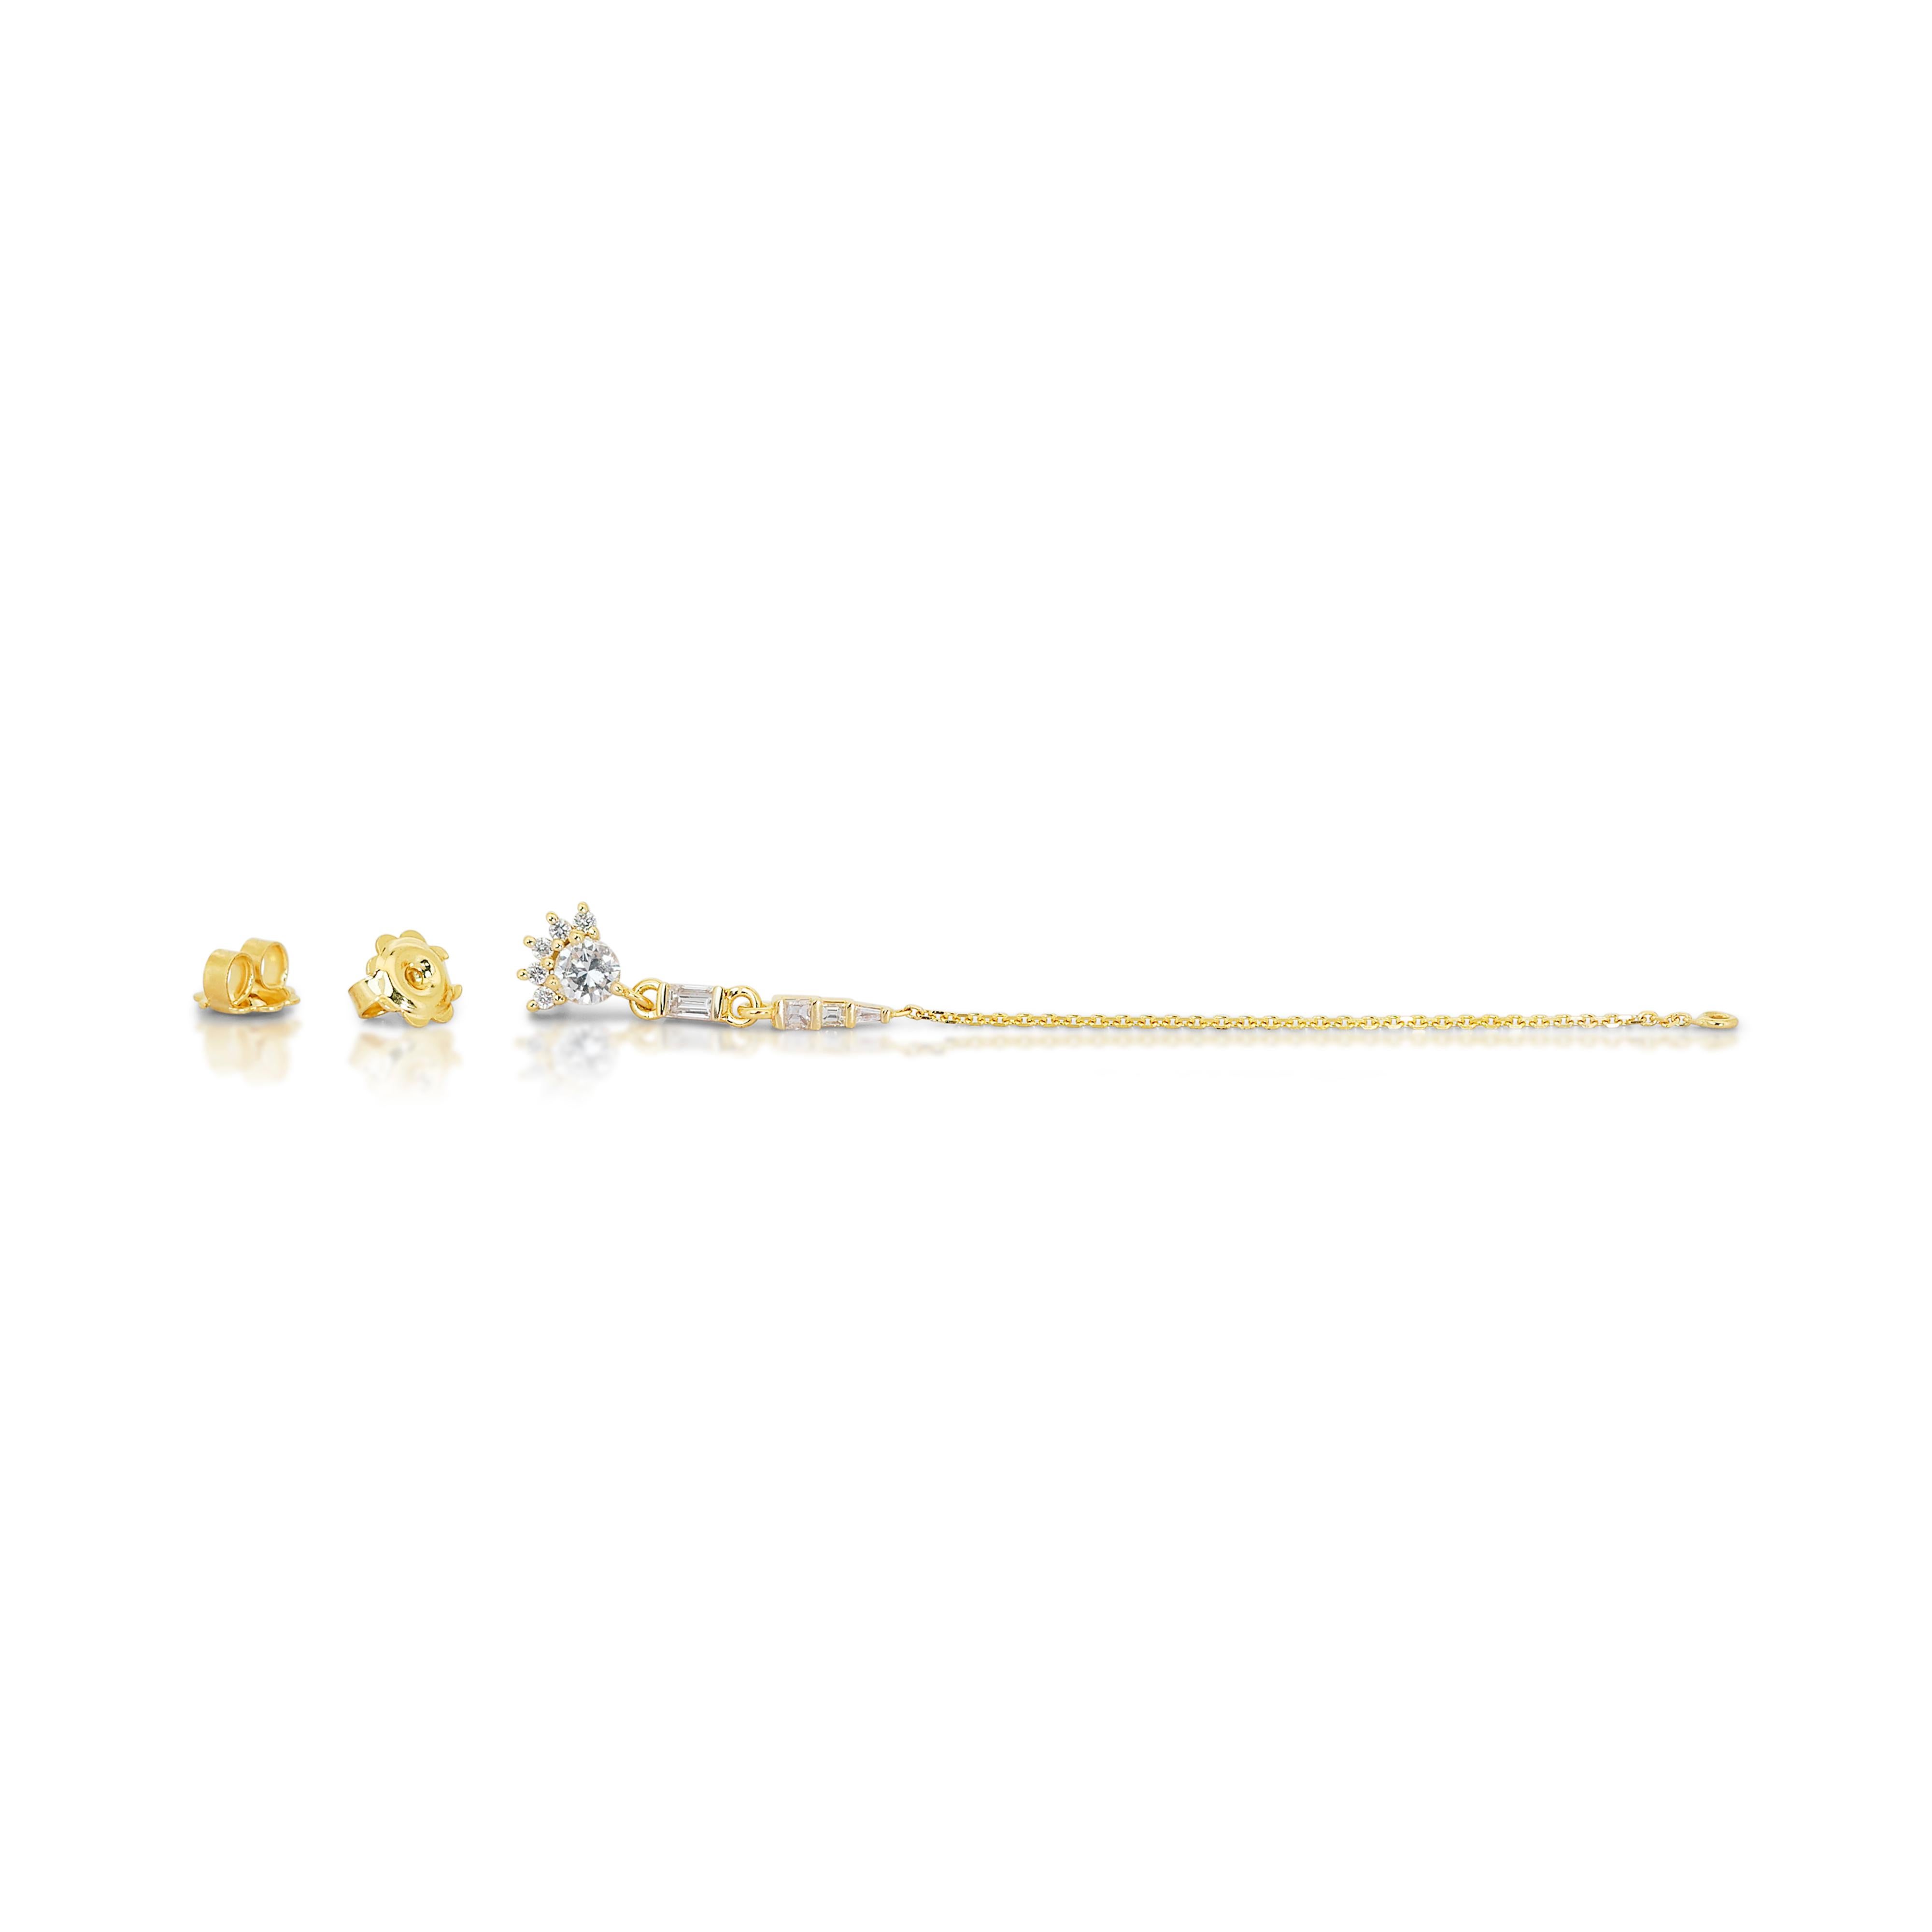 Fascinating 18K Yellow Gold Diamond Drop Earrings with 1.19ct - IGI Certified For Sale 3